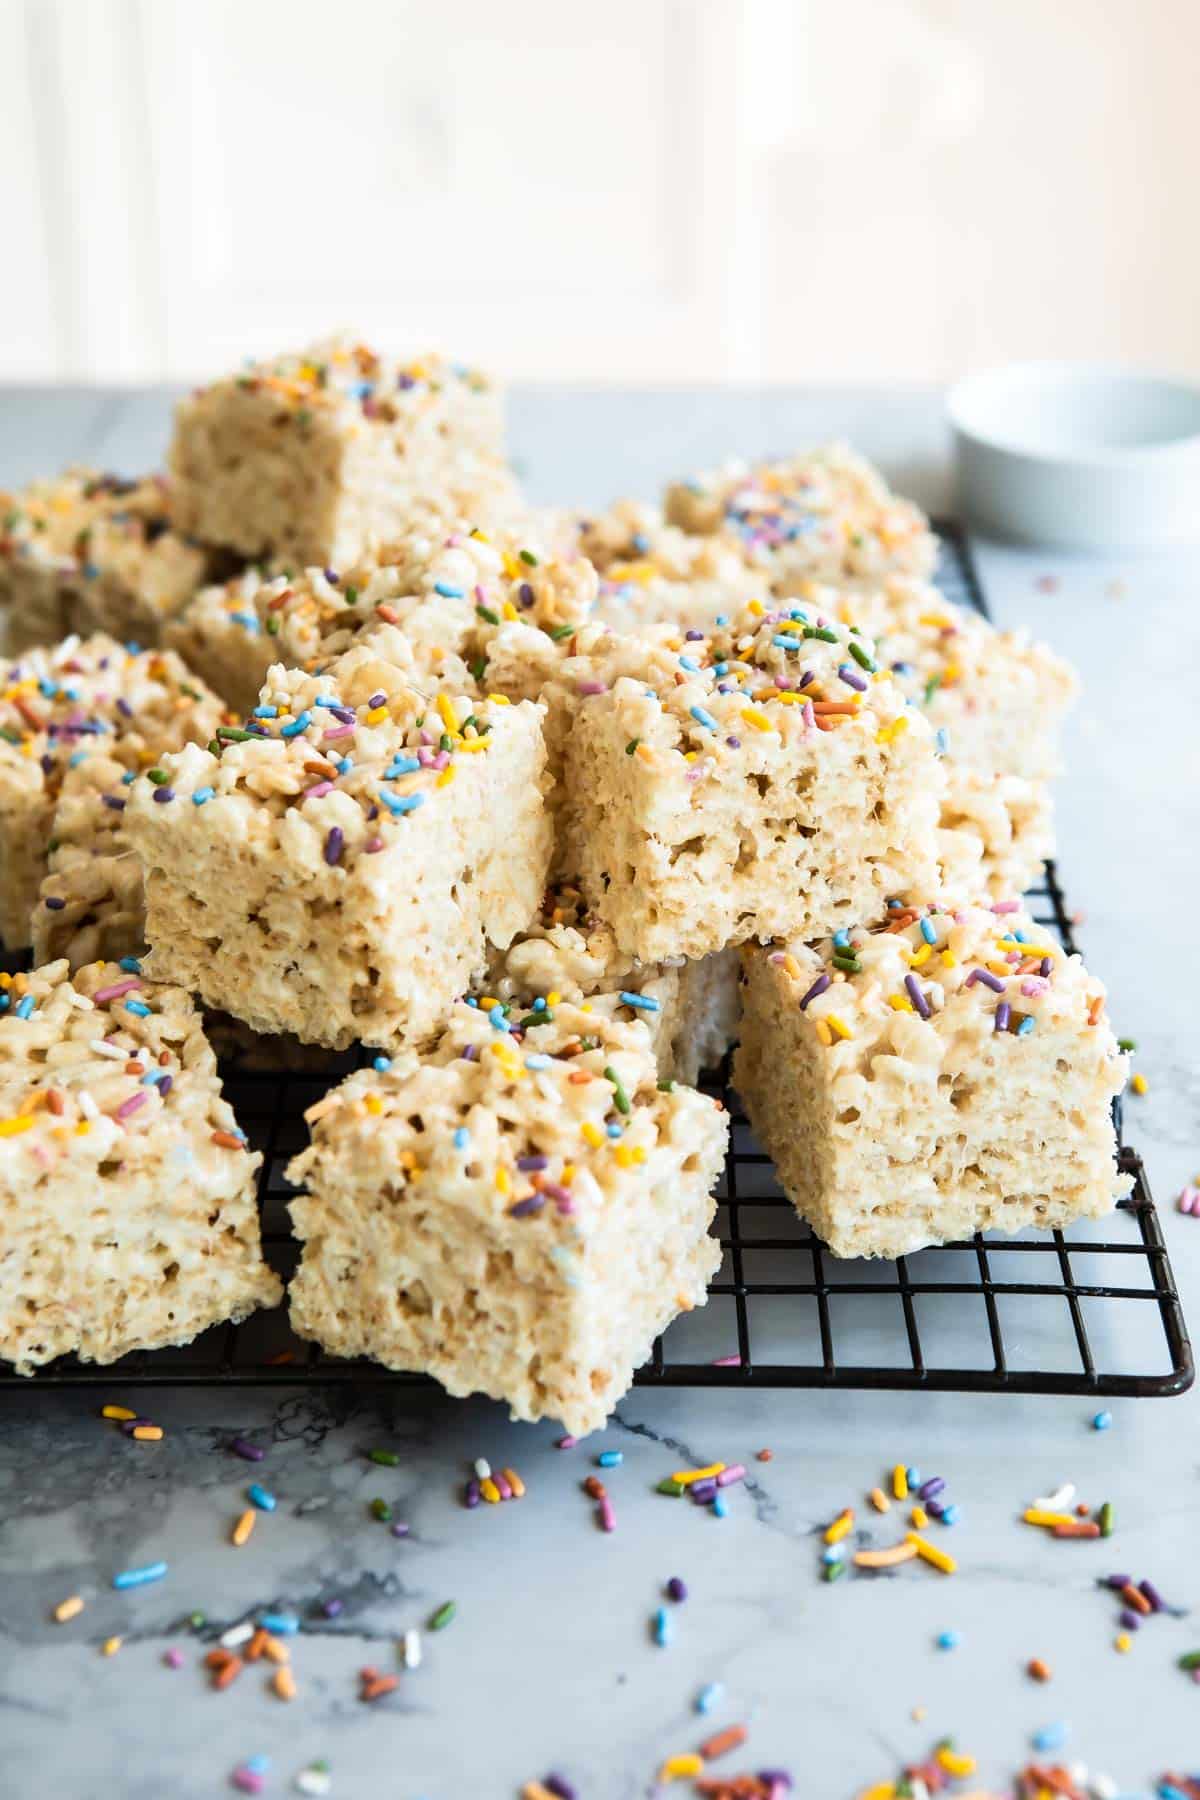 Rice Krispies® Cereal, Treats, Snacks and Recipes